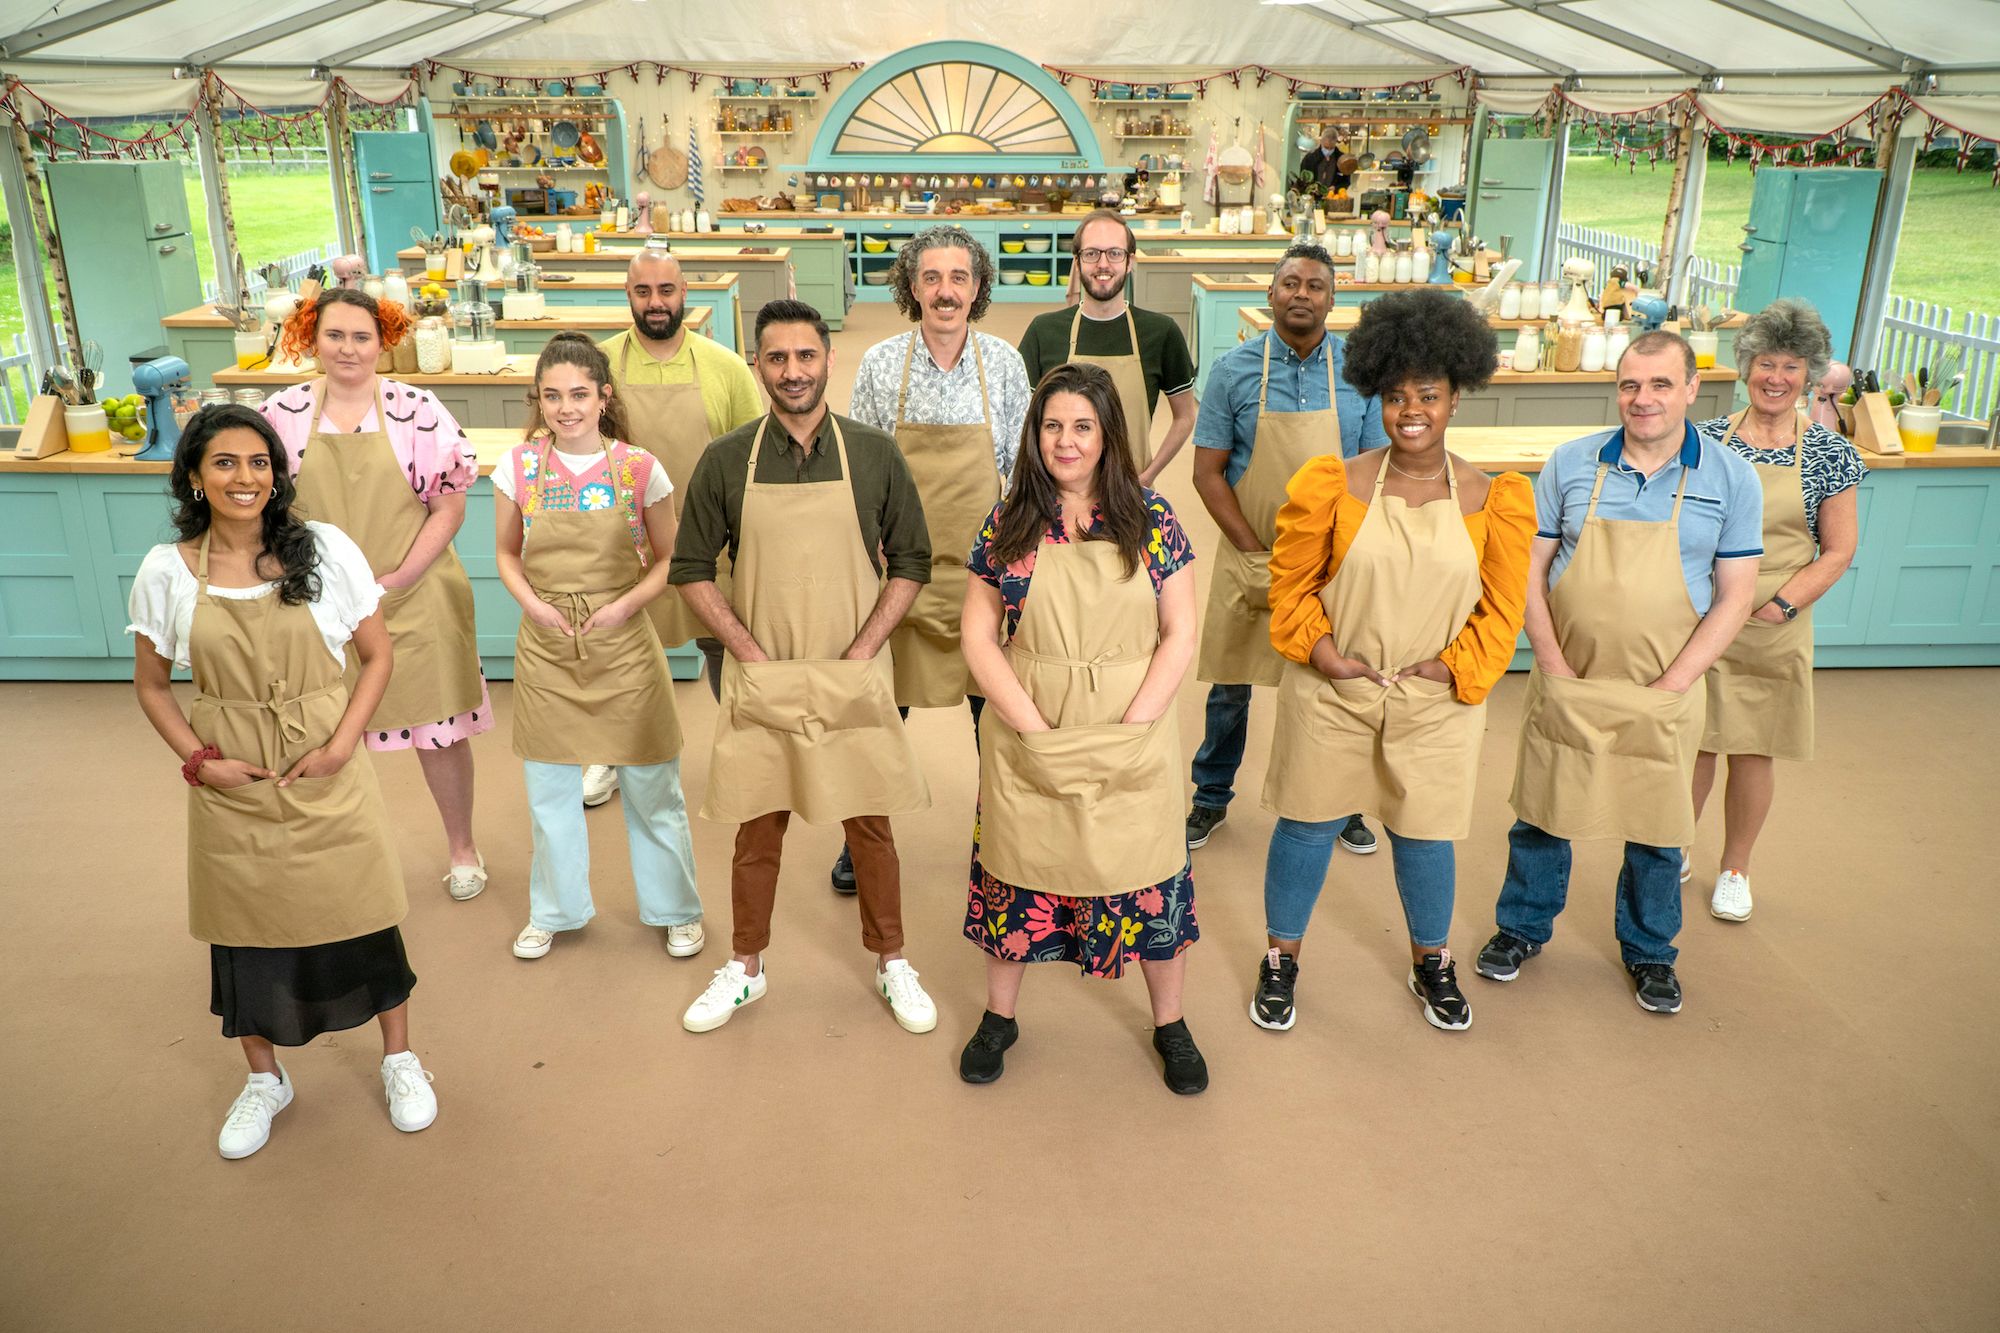 Meet the Cast of The Great British Baking Show